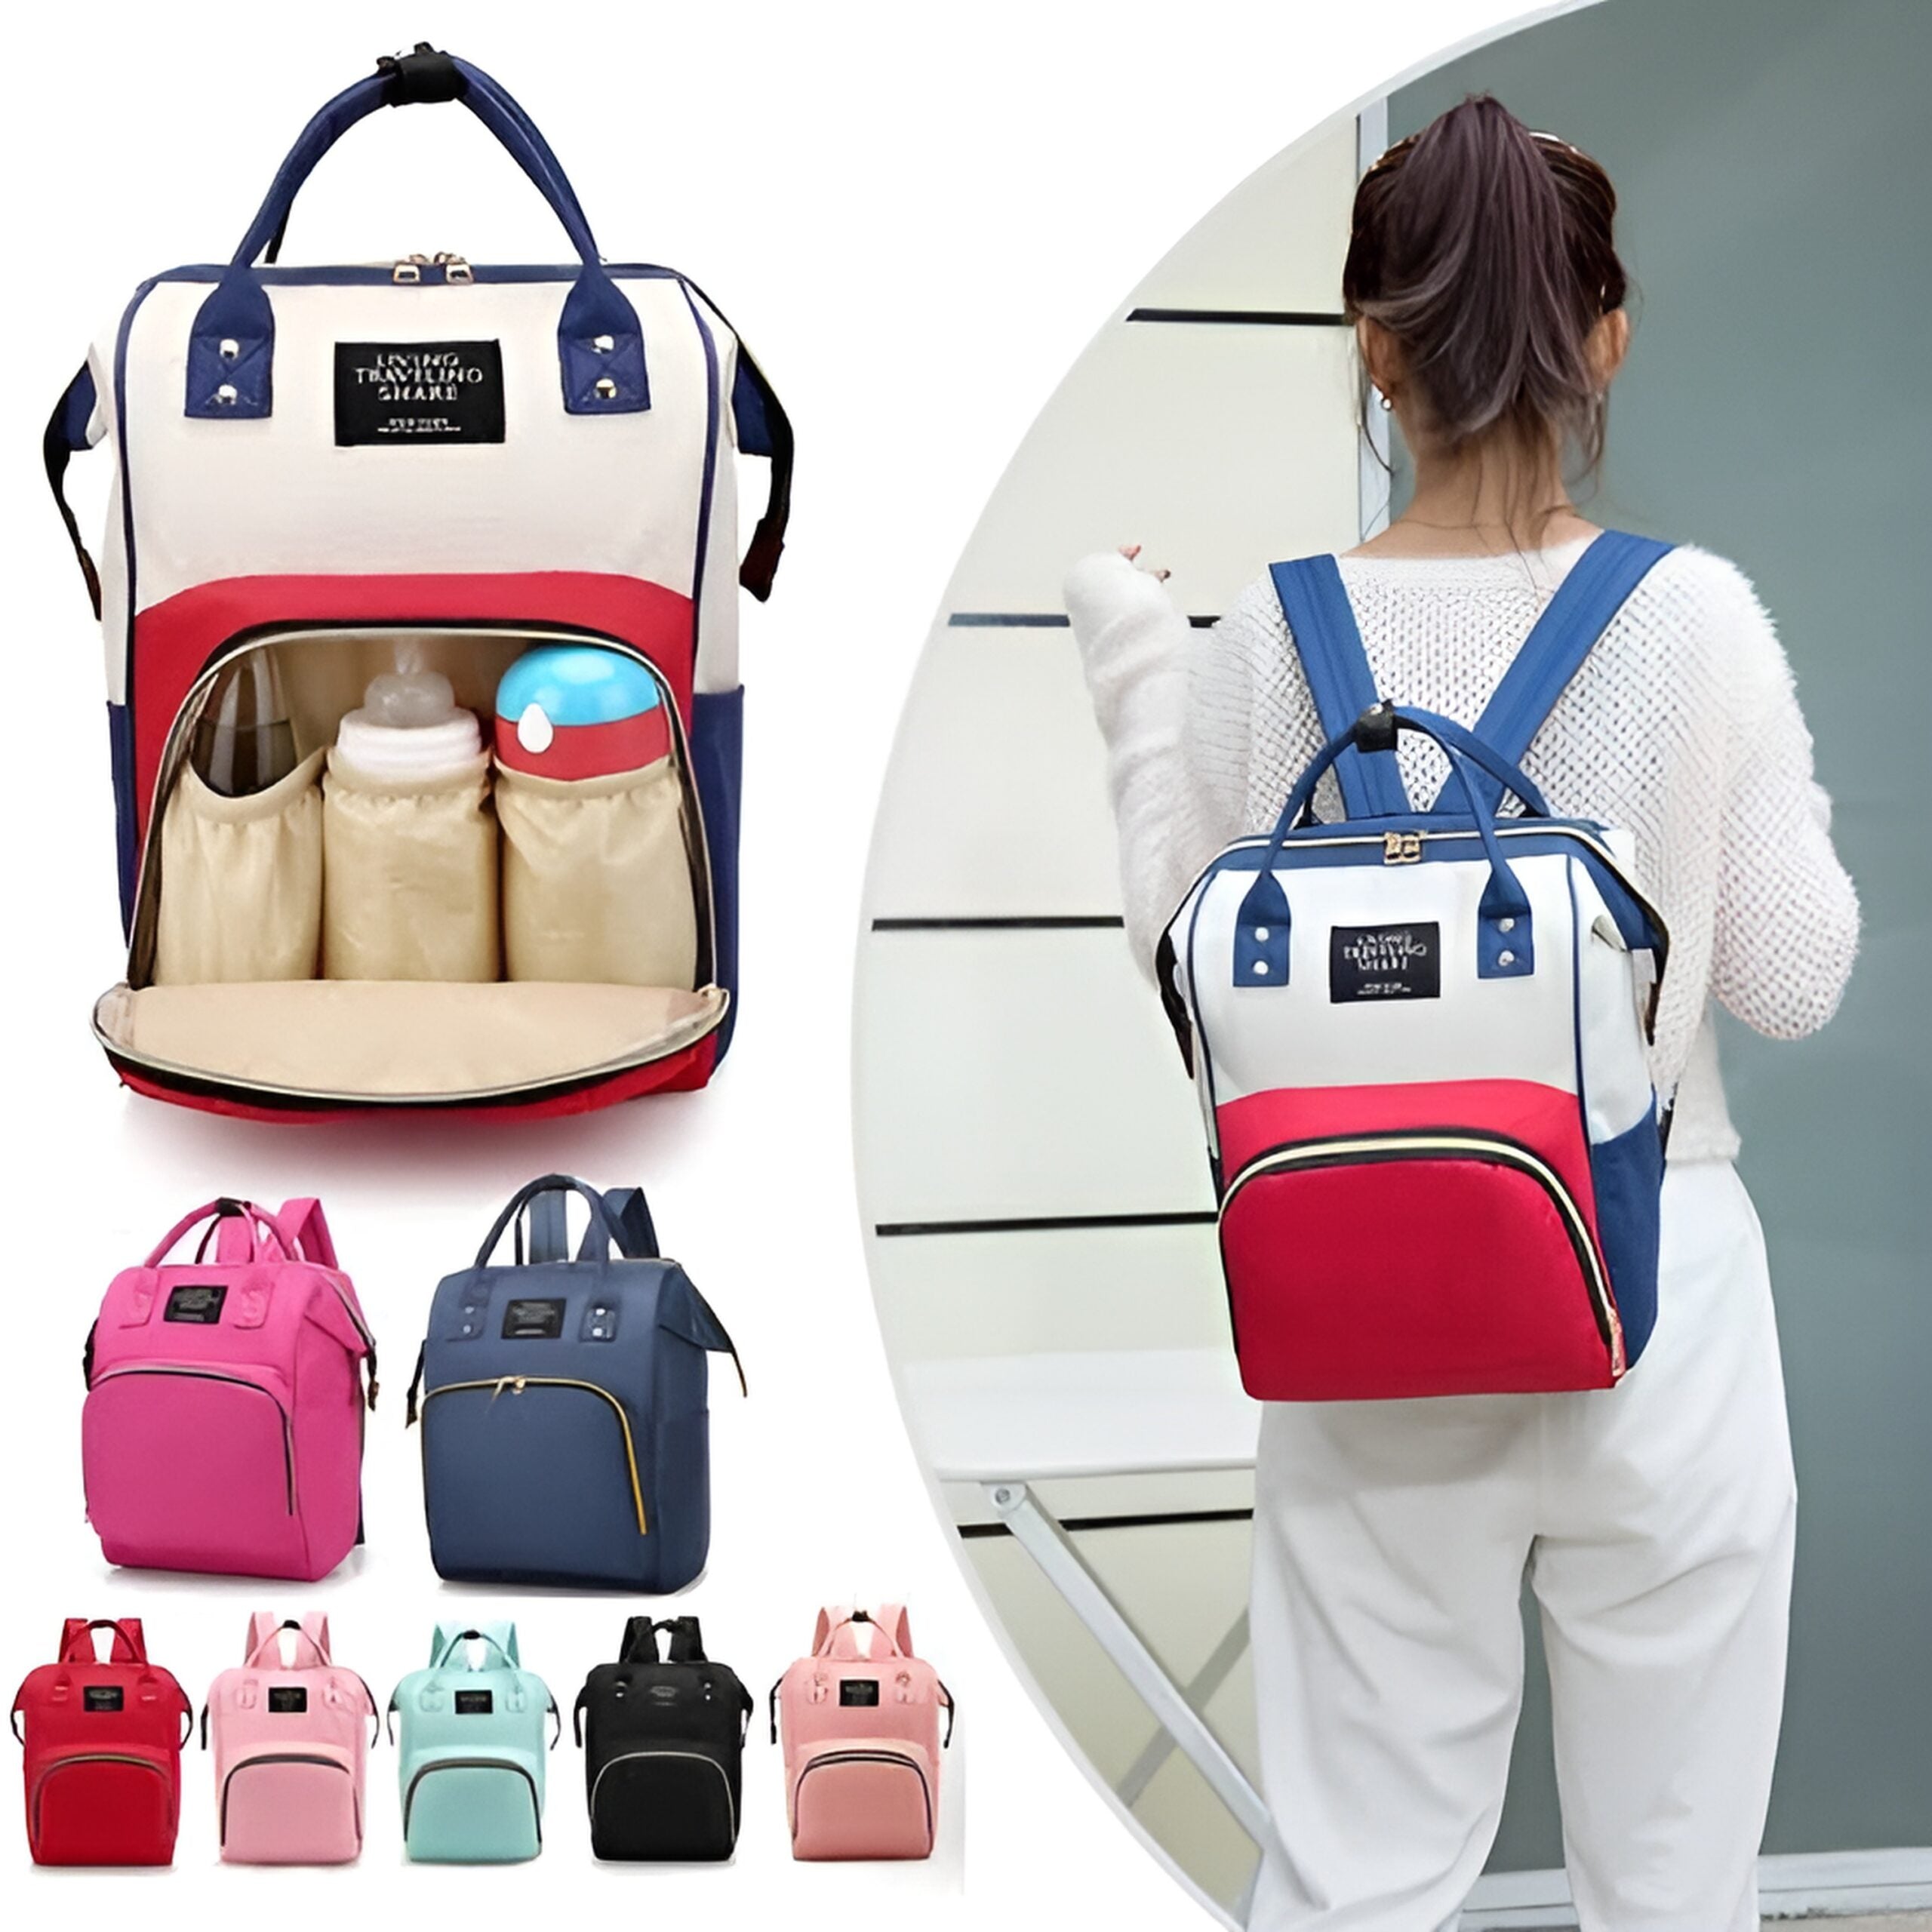 Mommy Backpack - Water Resistant Baby Accessories Bag